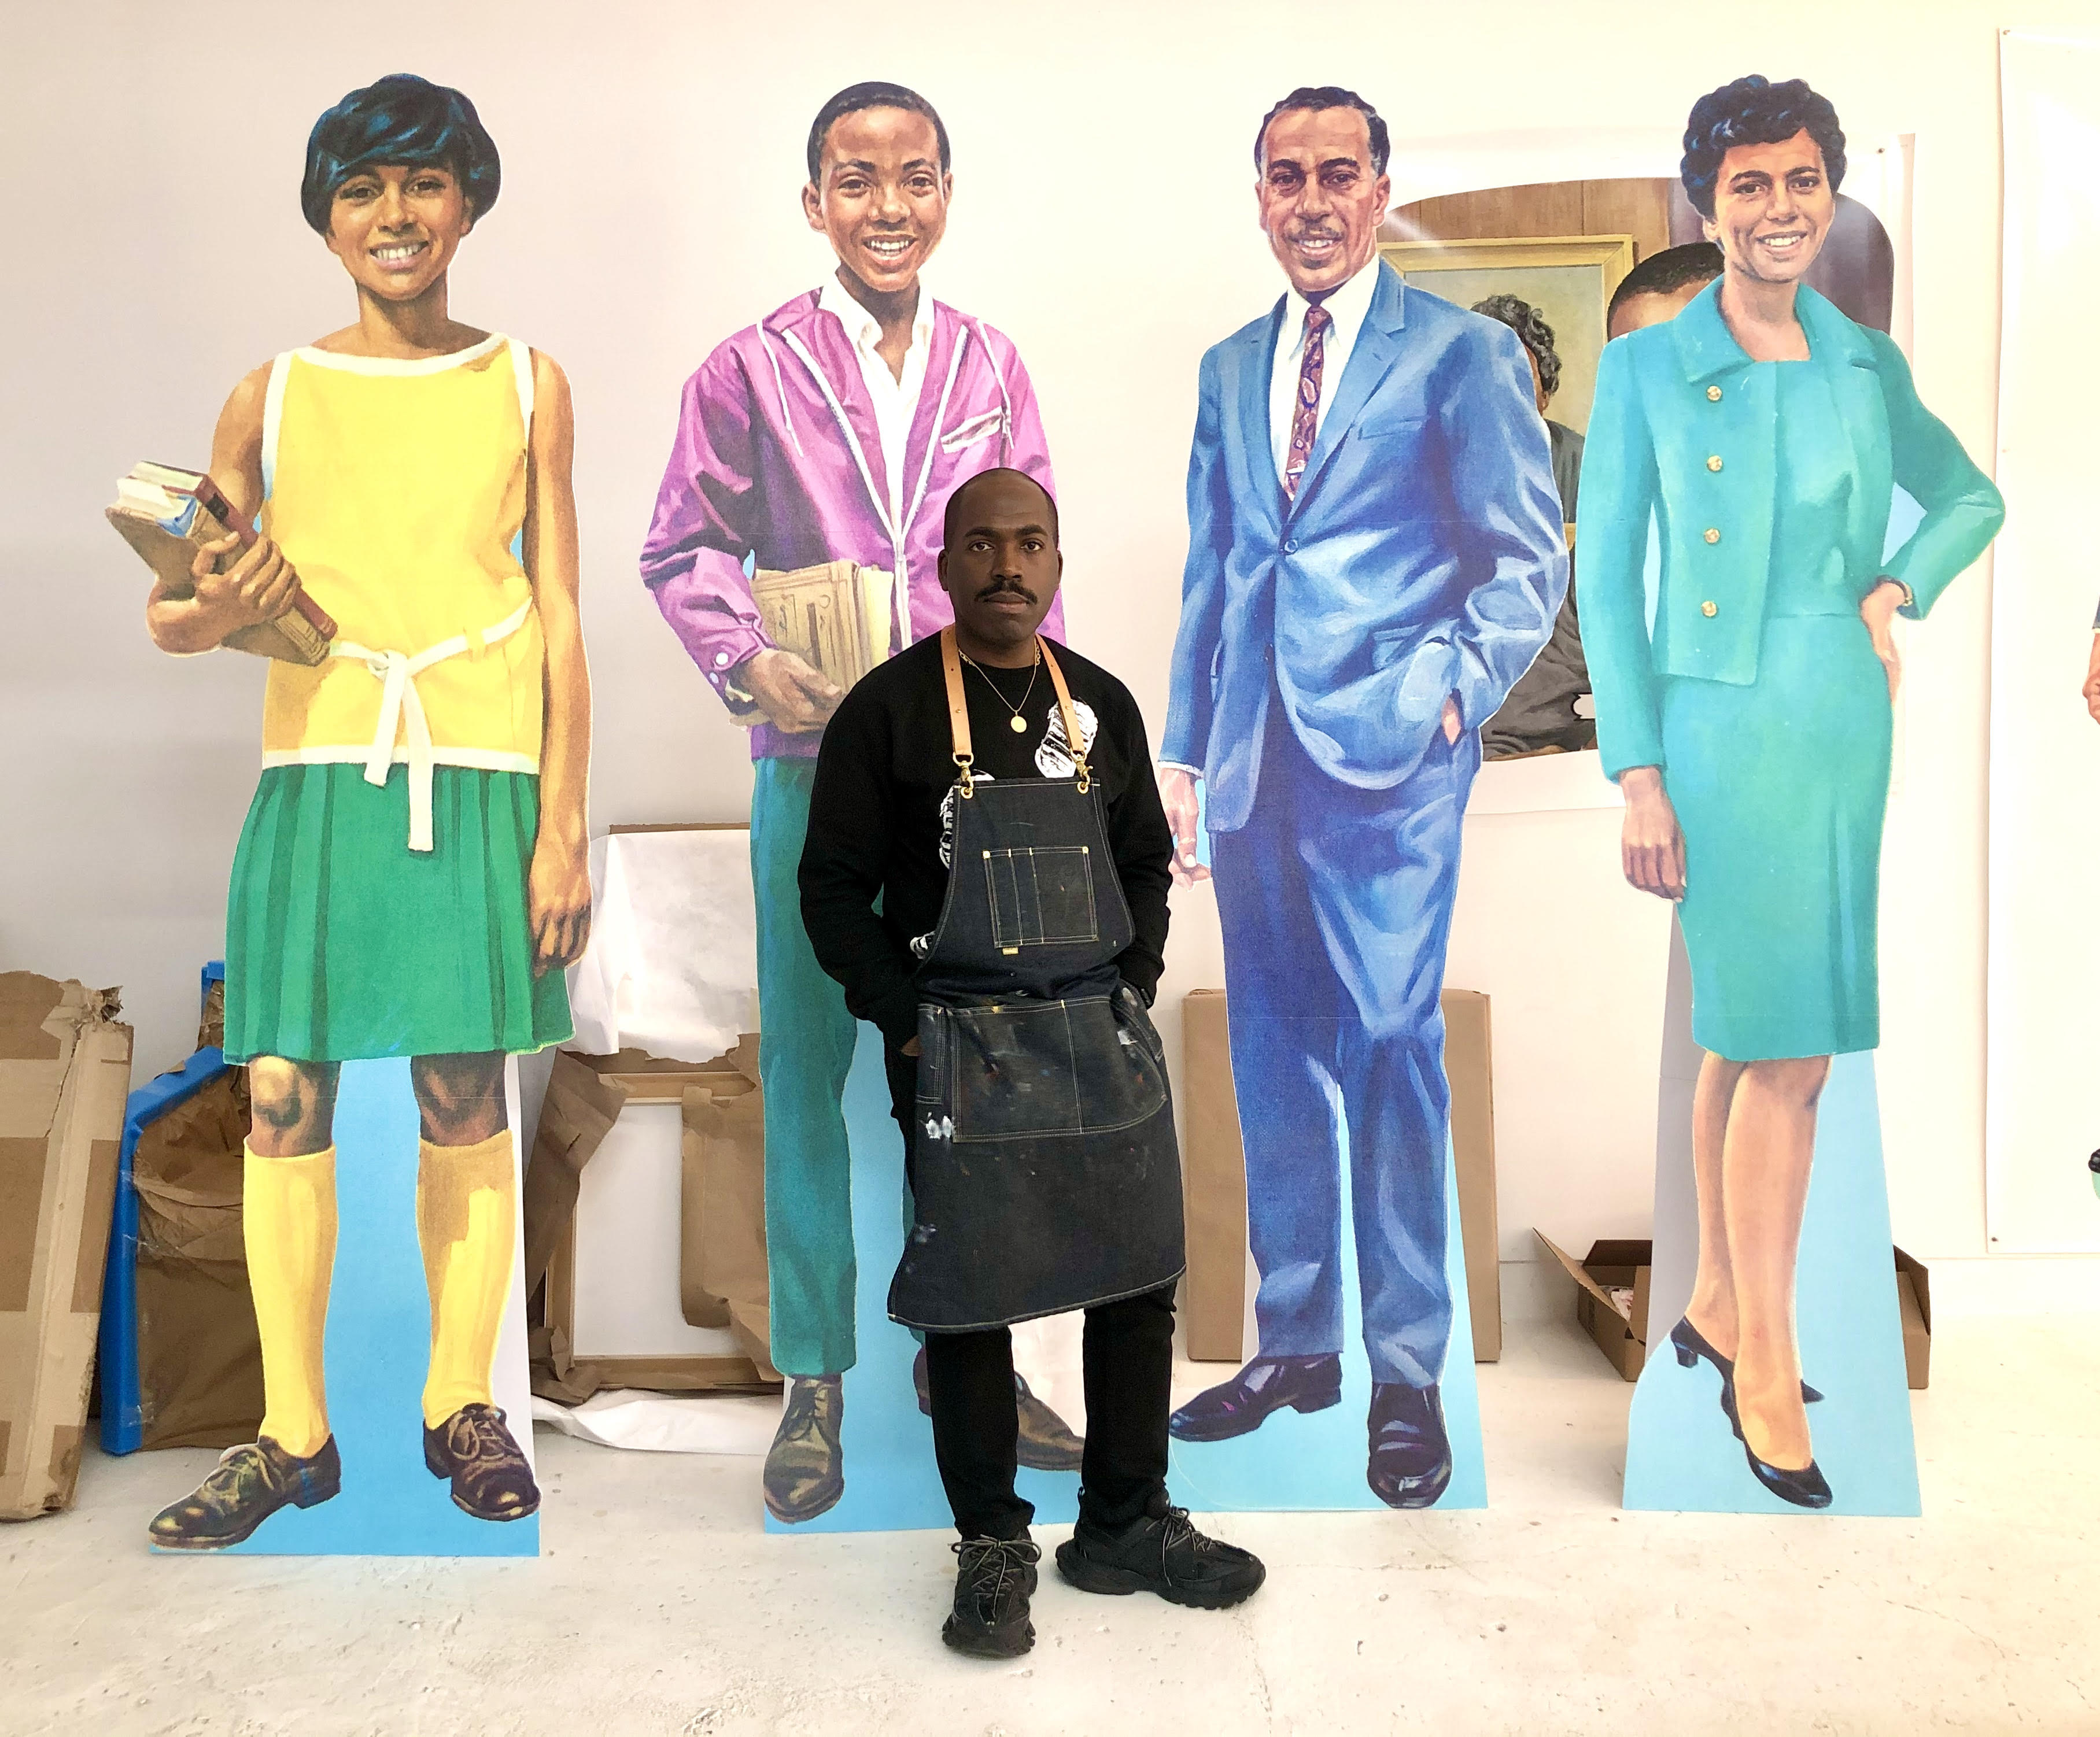 Milwaukee Art Museum to Unveil Large-Scale Mural Installation by Artist Derrick Adams